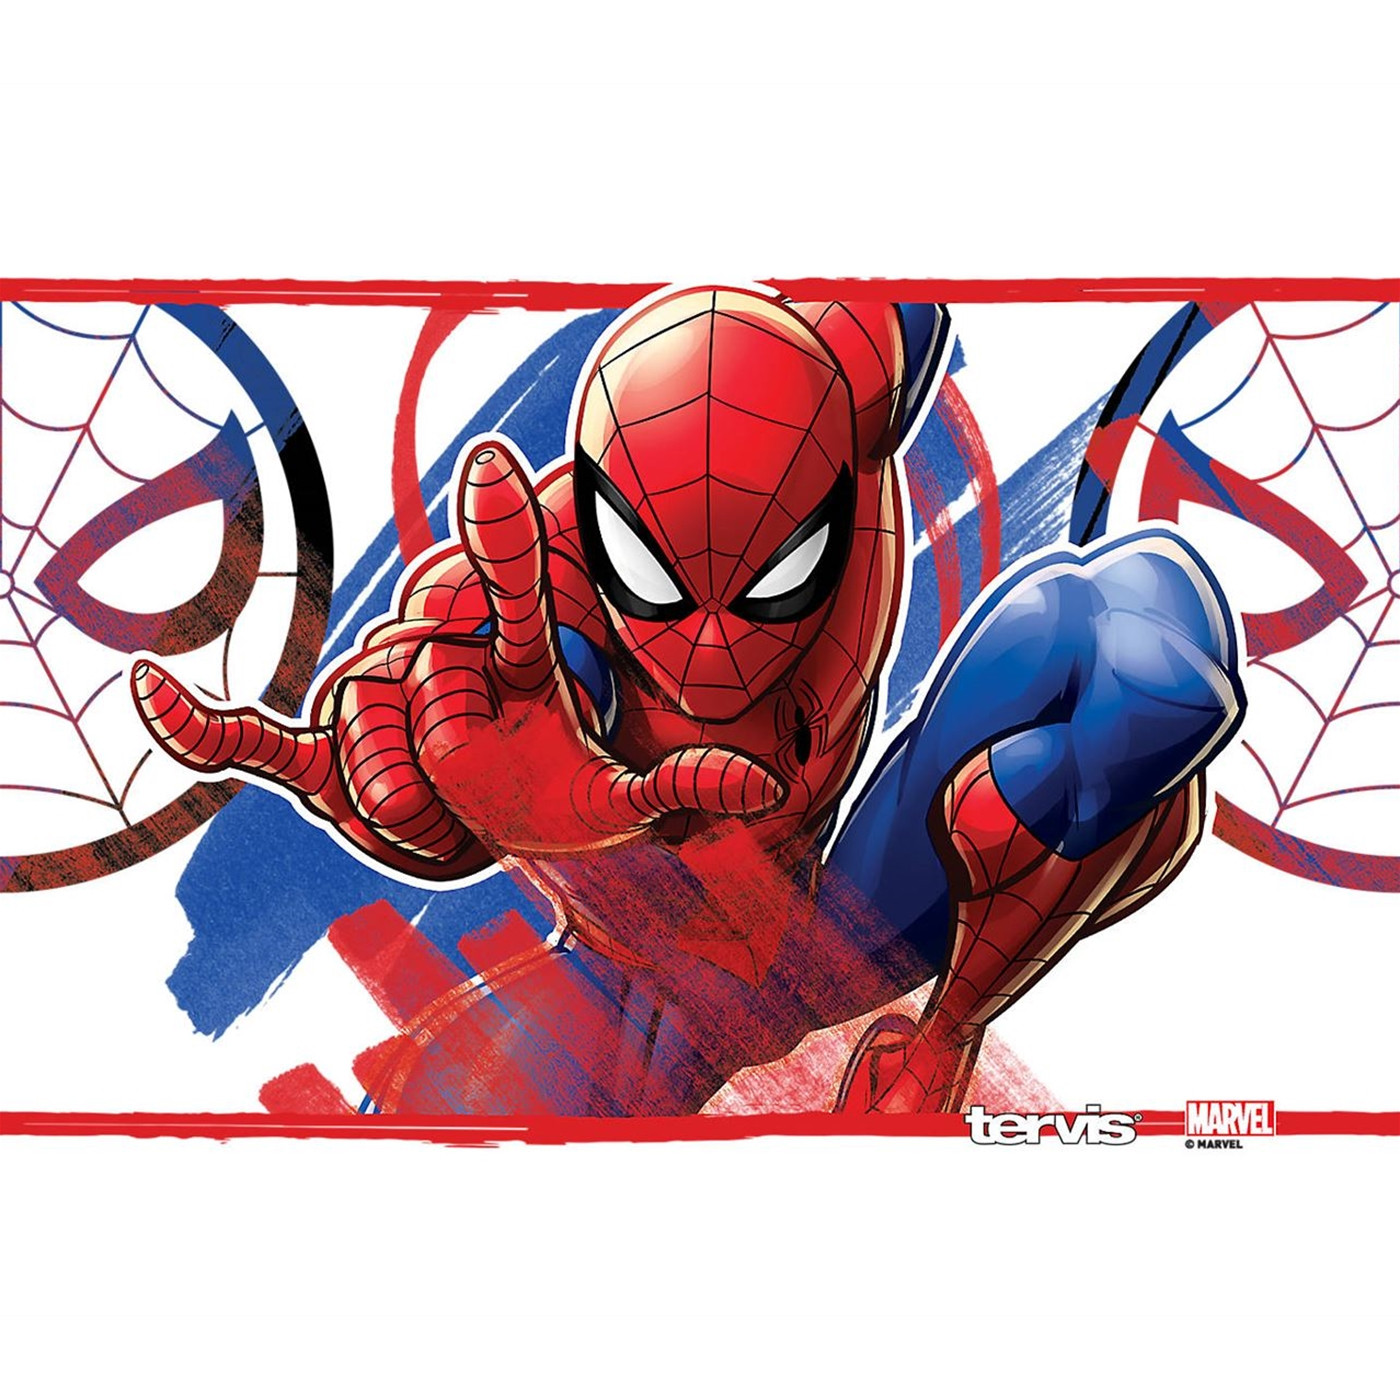 Spider-Man Iconic Stainless Steel Tervis™ Travel Mug With Hammer Lid